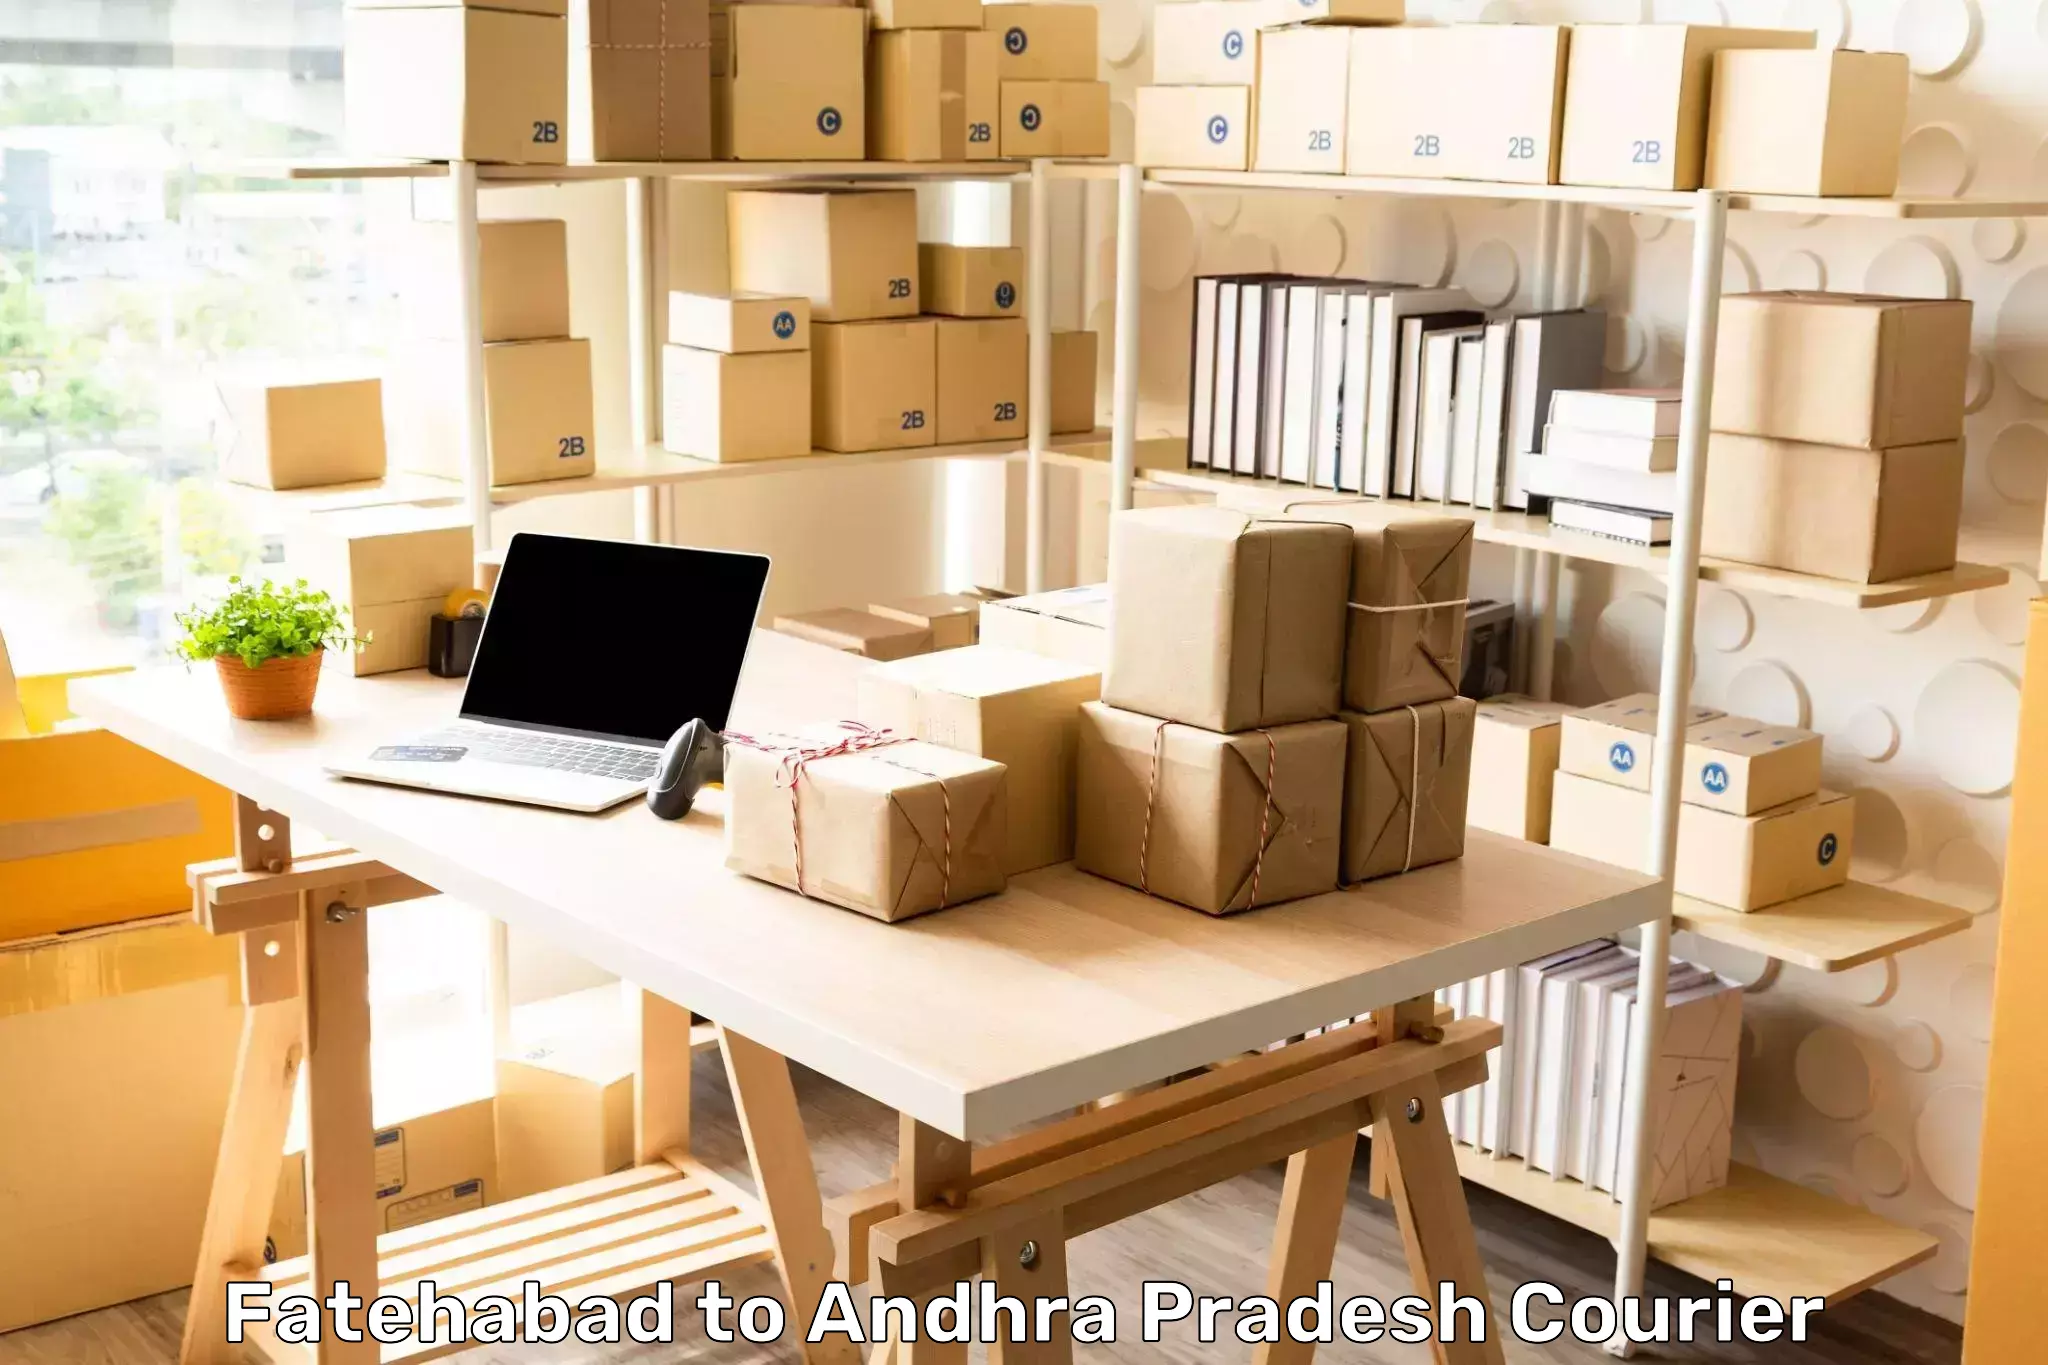 Cost-effective courier solutions Fatehabad to Nellore